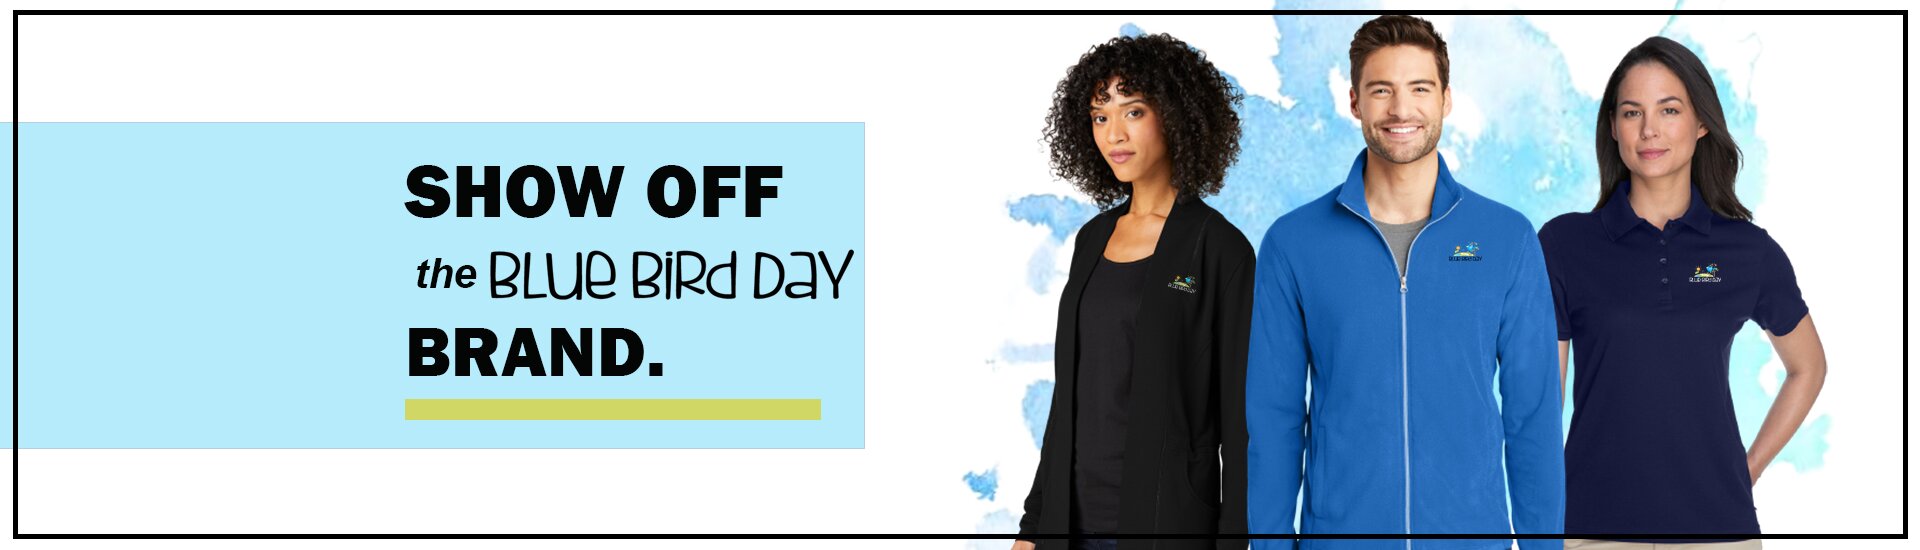 <a href='index.html?catid=1736'>Shop New For Holiday</a><a href='index.html?catid=1328'>Shop Polos</a><a href='index.html?catid=1327'>Shop Jackets</a>